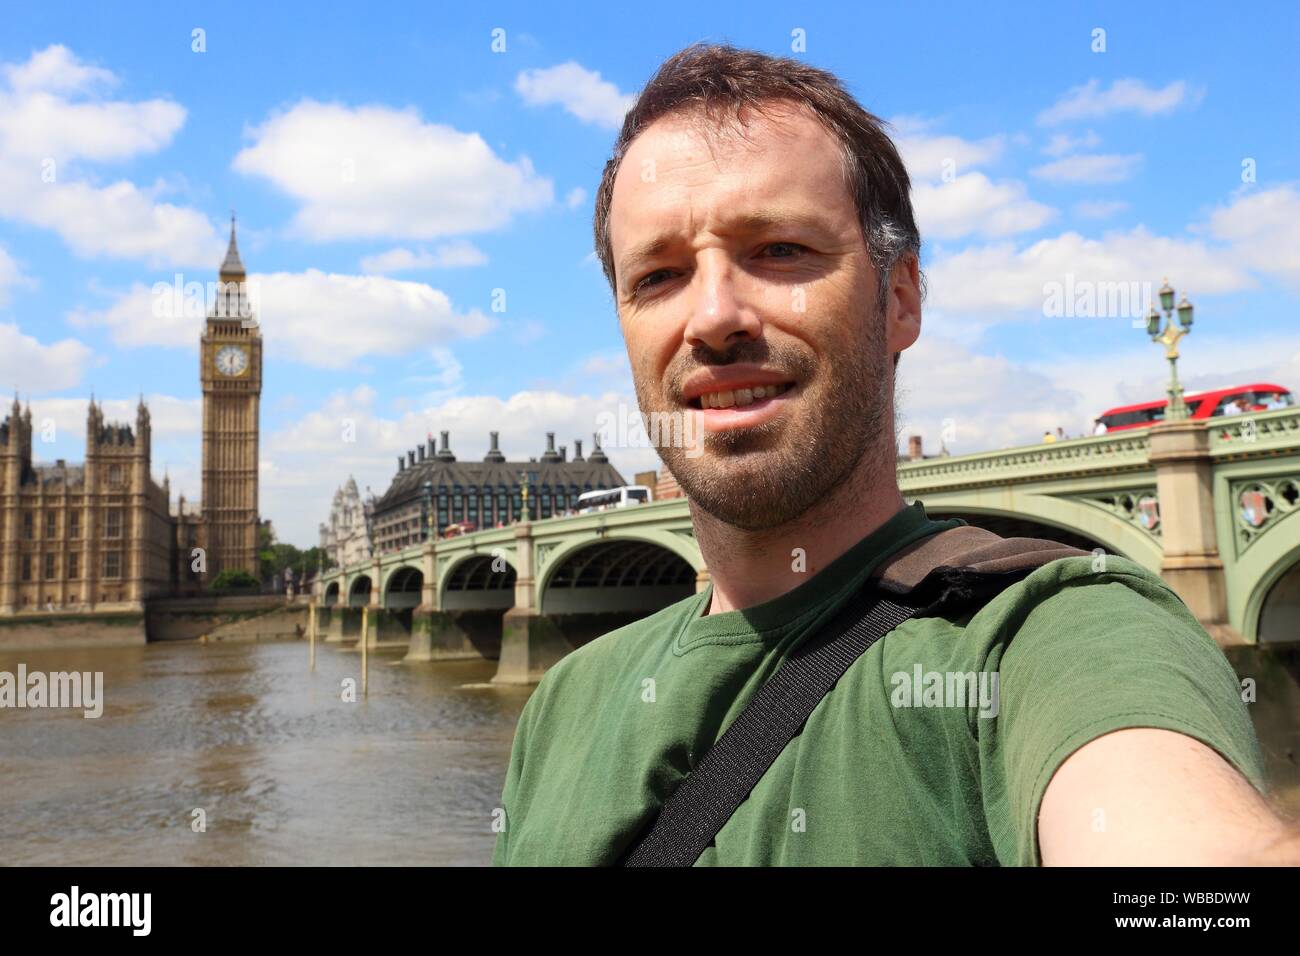 Tourist selfie with London parliament and Big Ben. Stock Photo